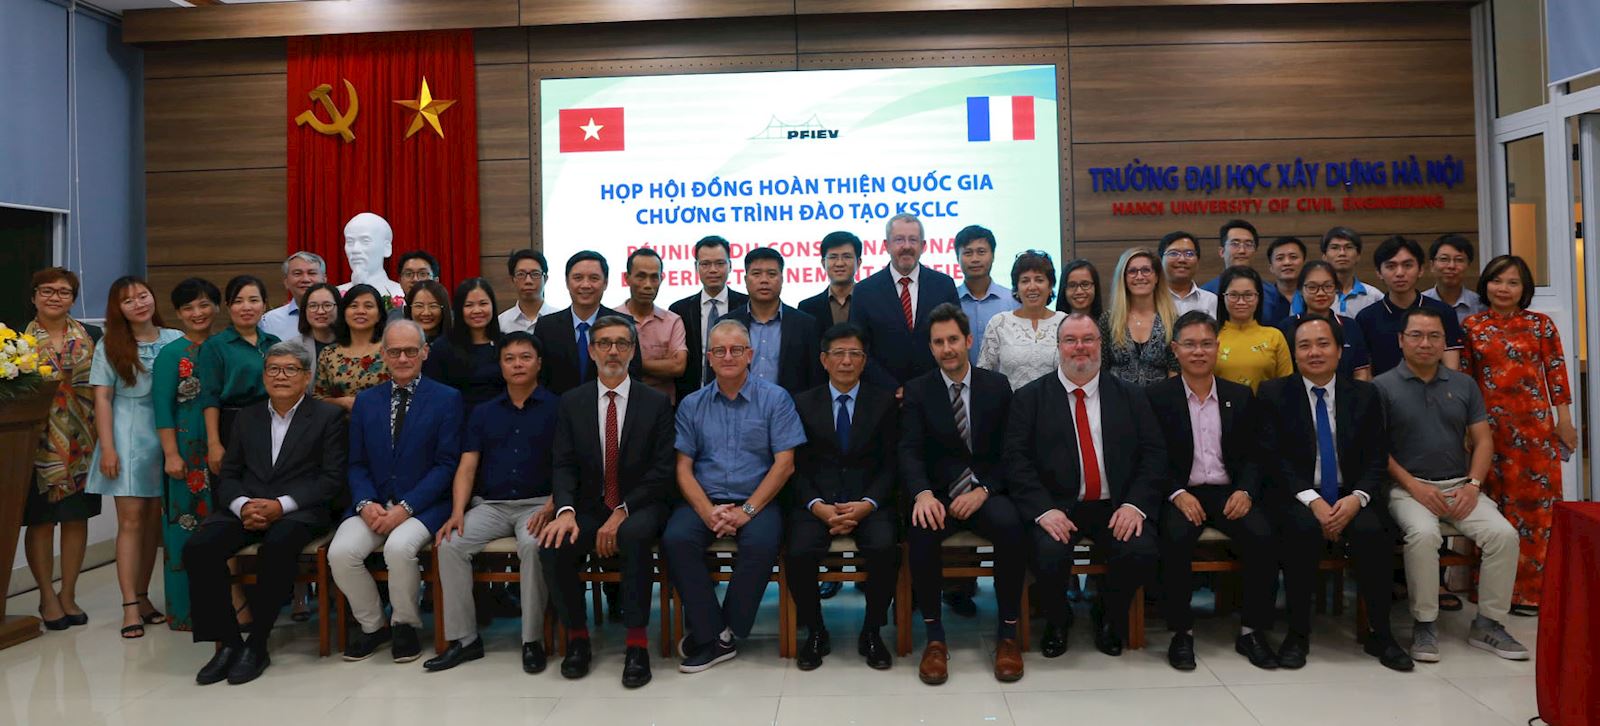 Meeting of The National Council for The Perfection of The High-Quality Engineer Education Program in VietNam